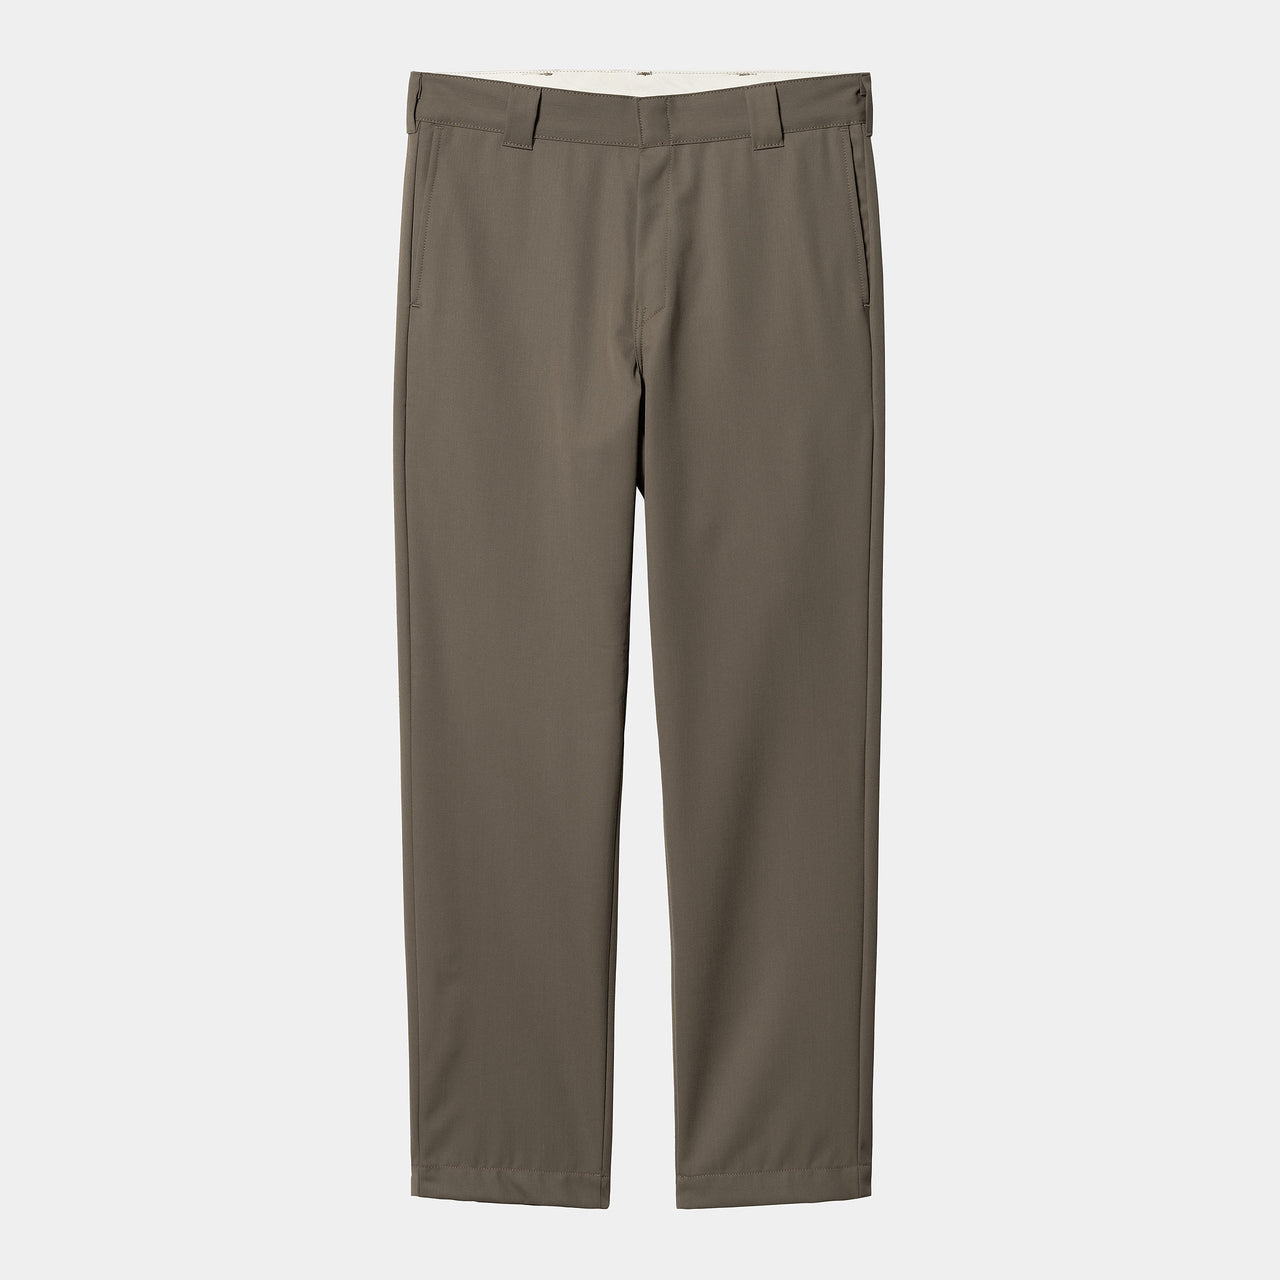 MASTER PANTS BY CARHARTT WIP